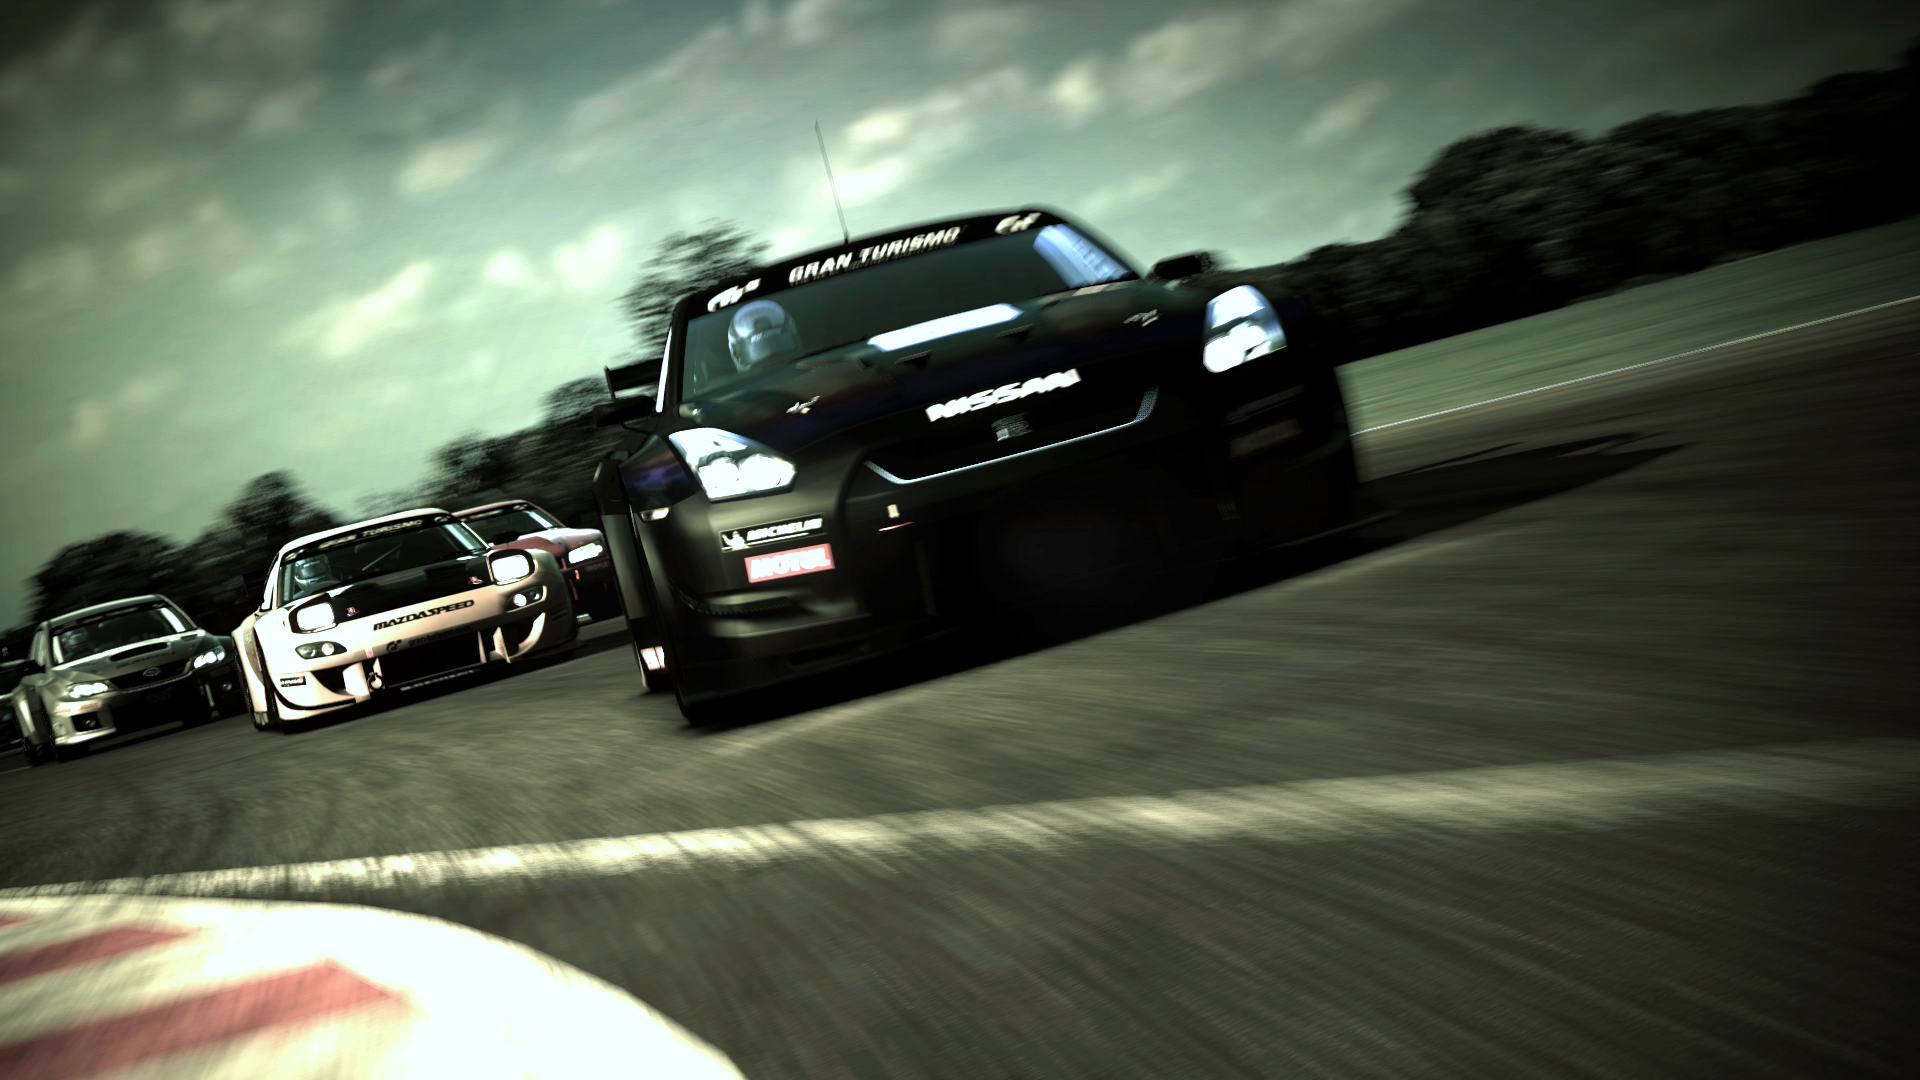 Despite being somewhat old, Gran Turismo 5 still looks awesome